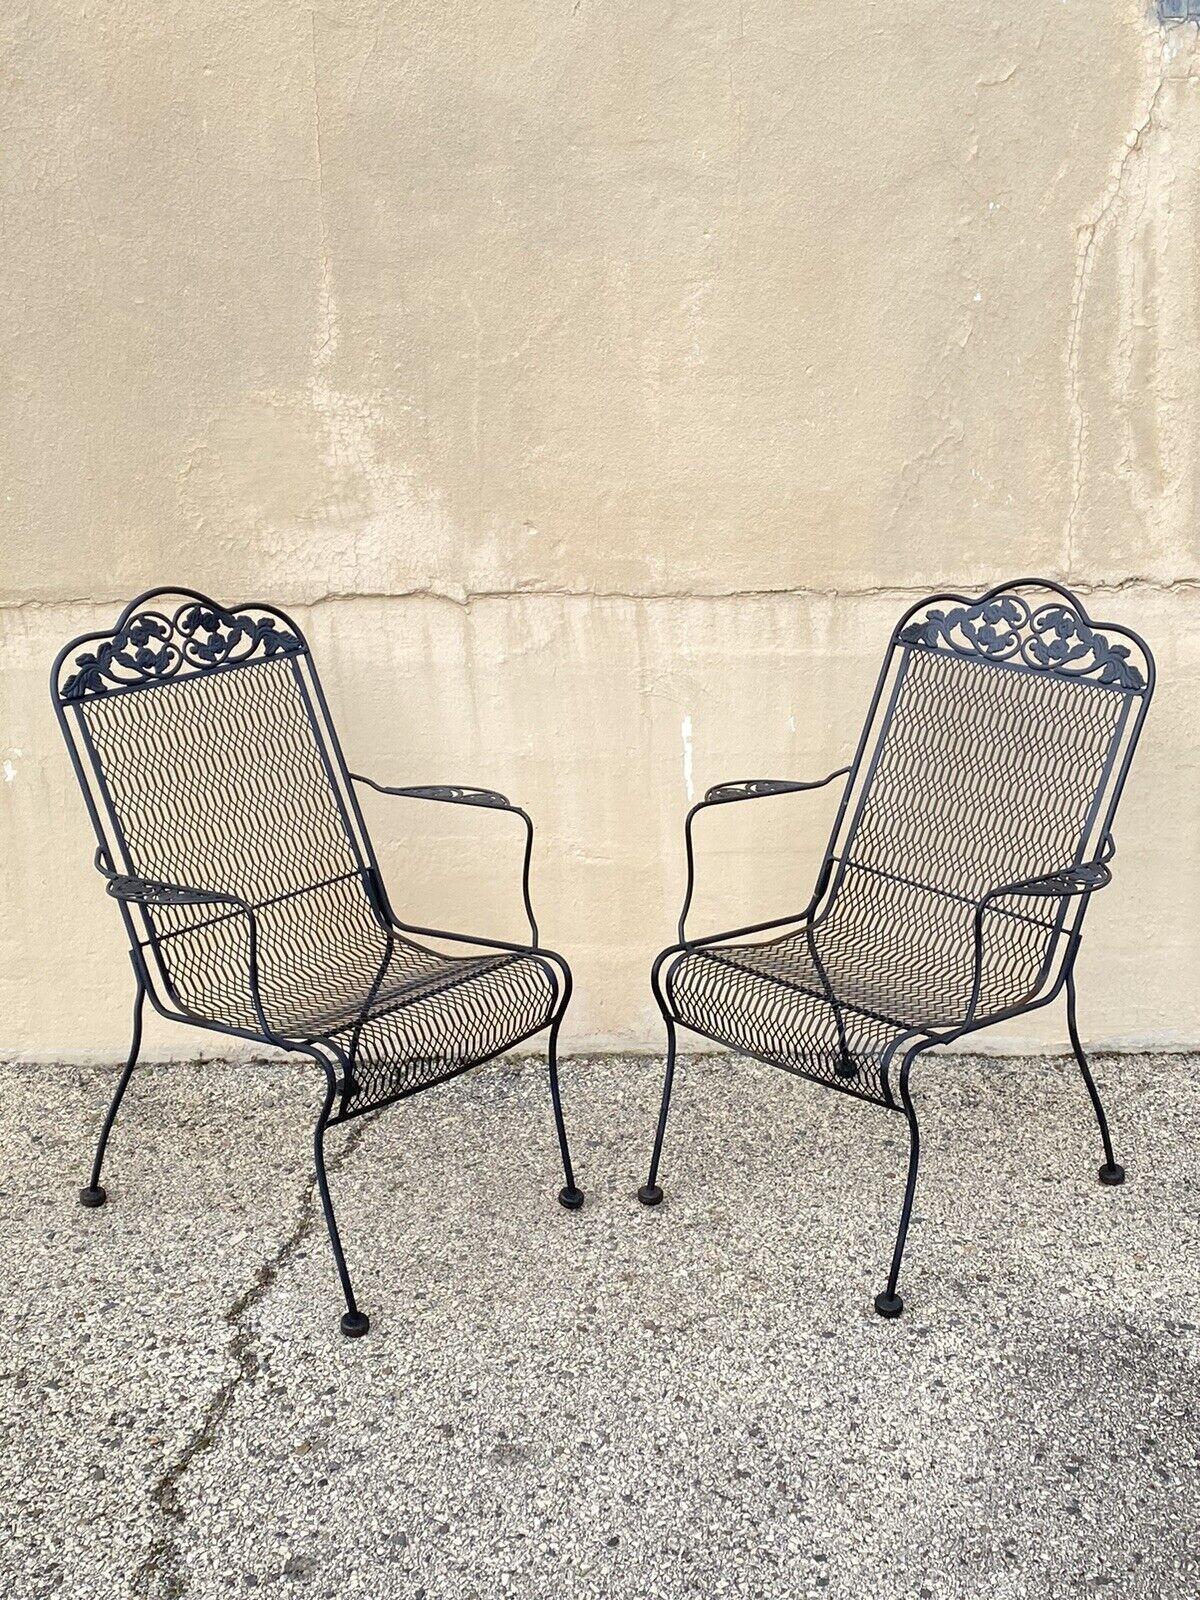 Vintage Wrought Iron Rose and Vine Pattern Garden Patio Chairs - 7 Pc Set For Sale 8